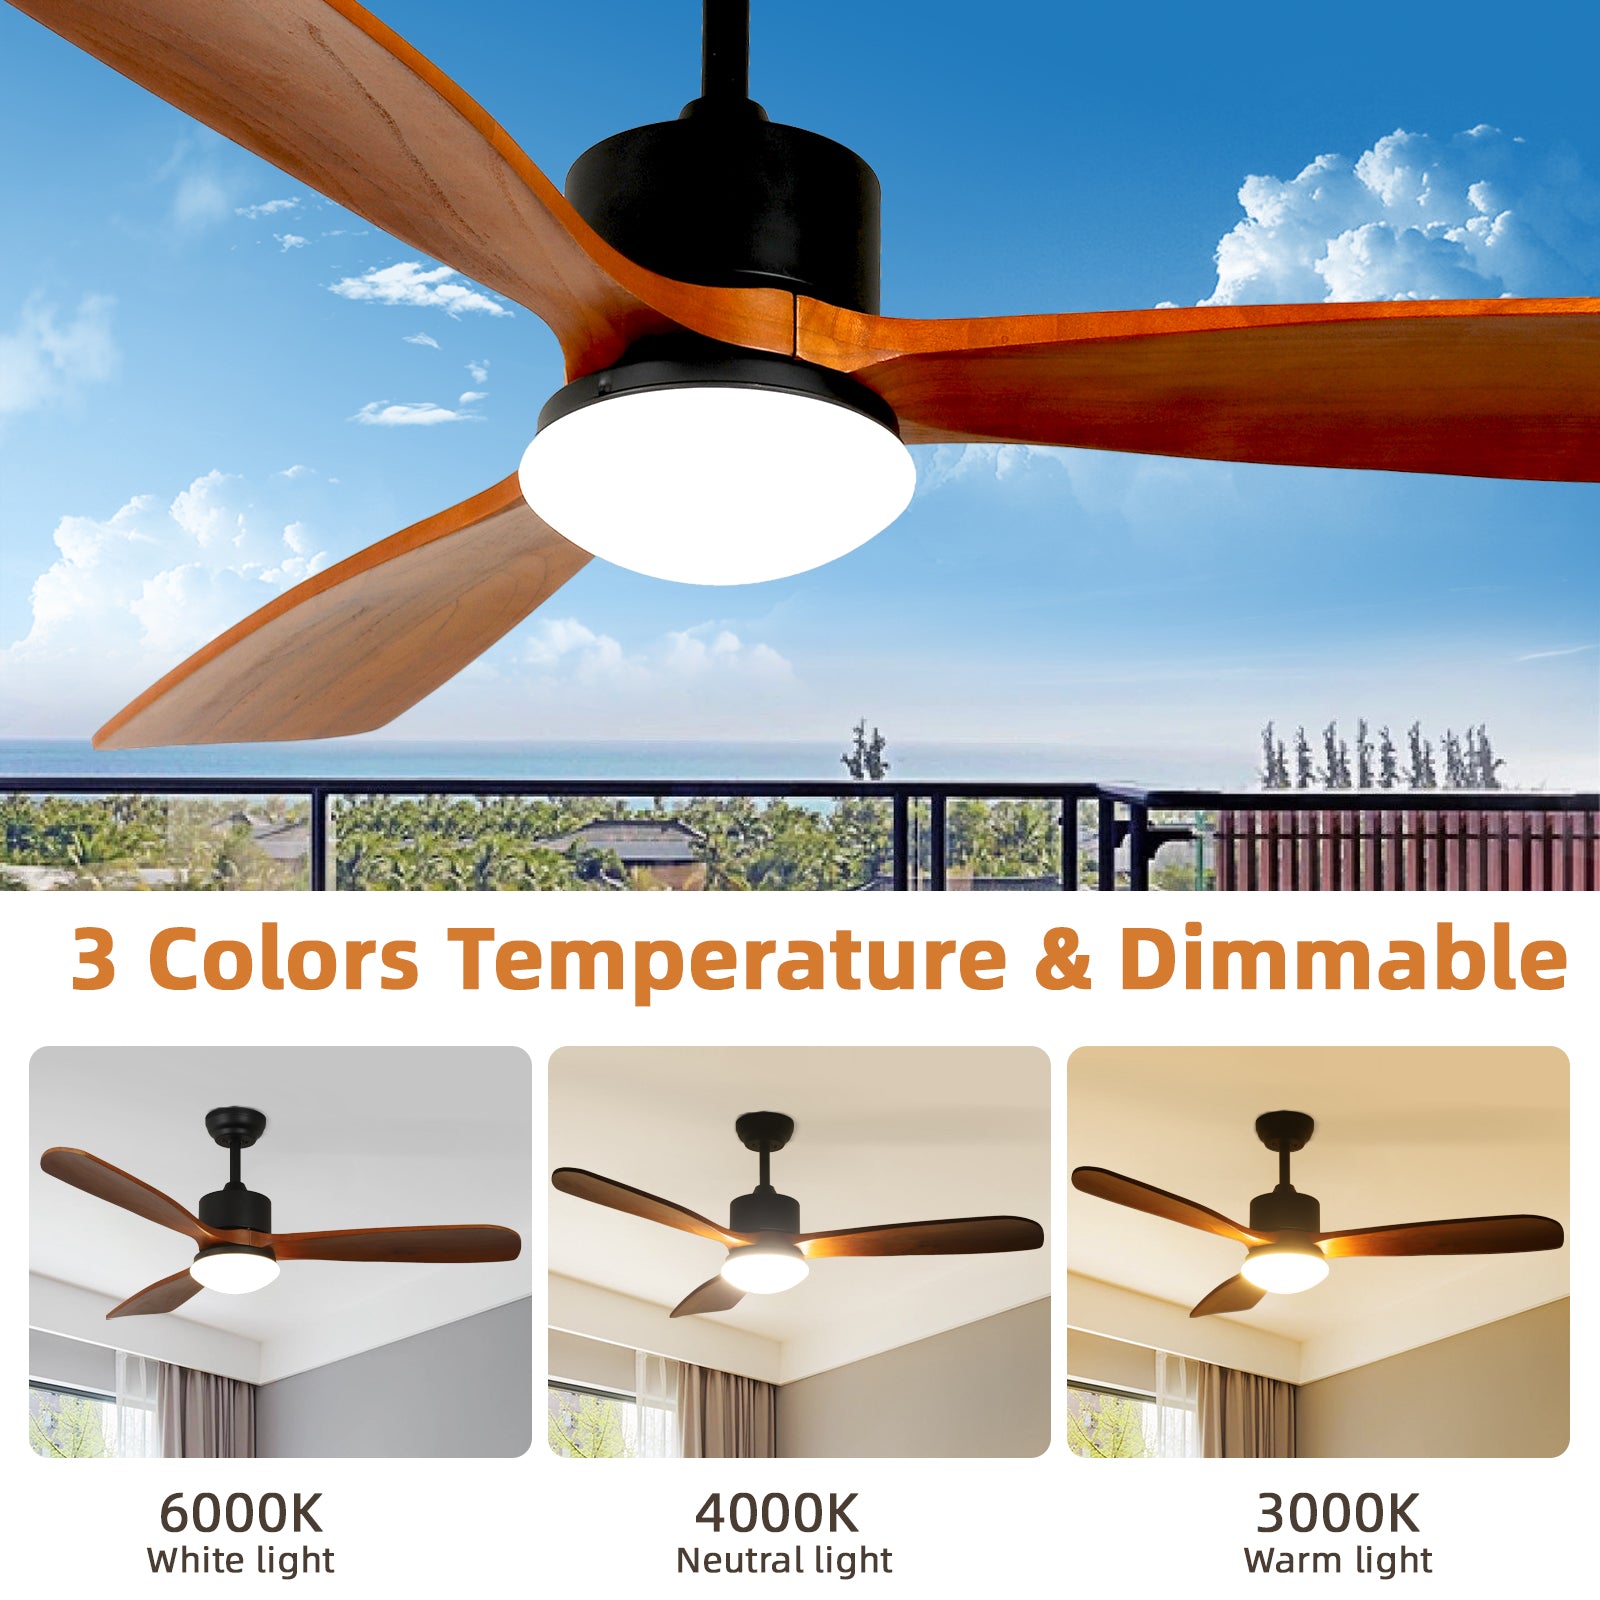 REYDELUZ 52" Ceiling Fan with Lights Remote Control Outdoor Wood Ceiling Fans Noiseless Reversible DC Motor